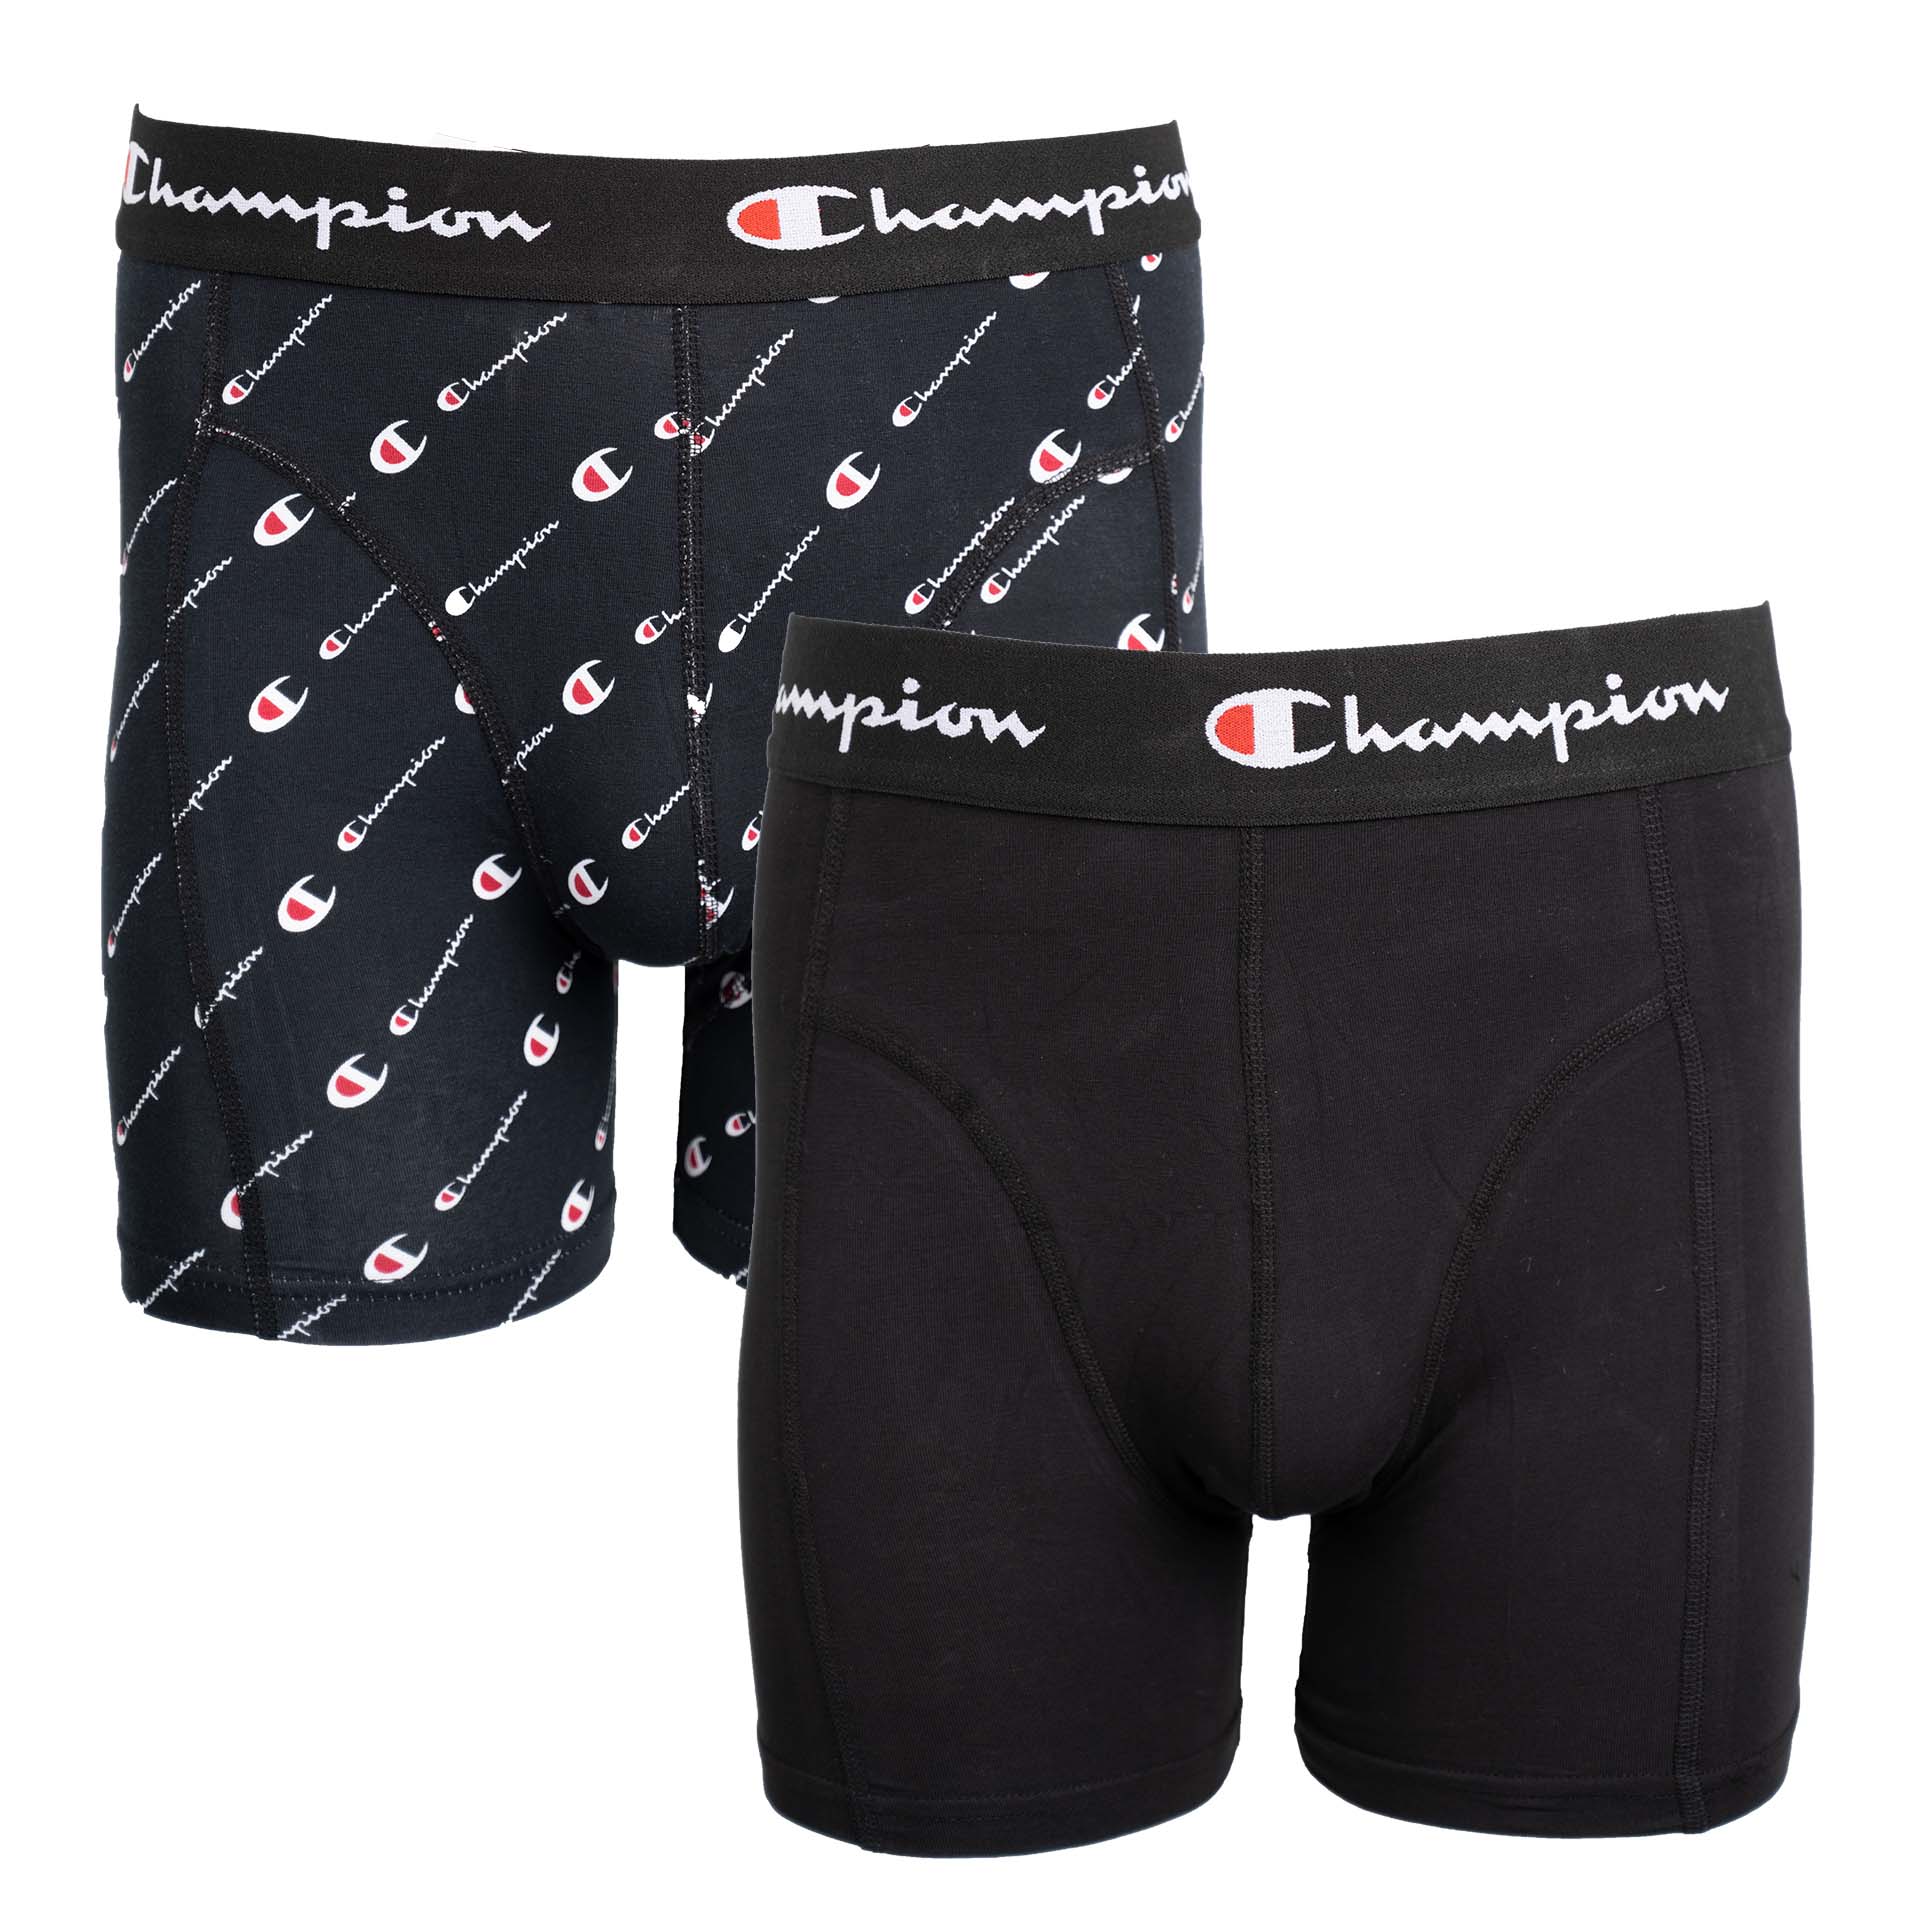 Champion 2Pack Boxershorts Black/All Over Print